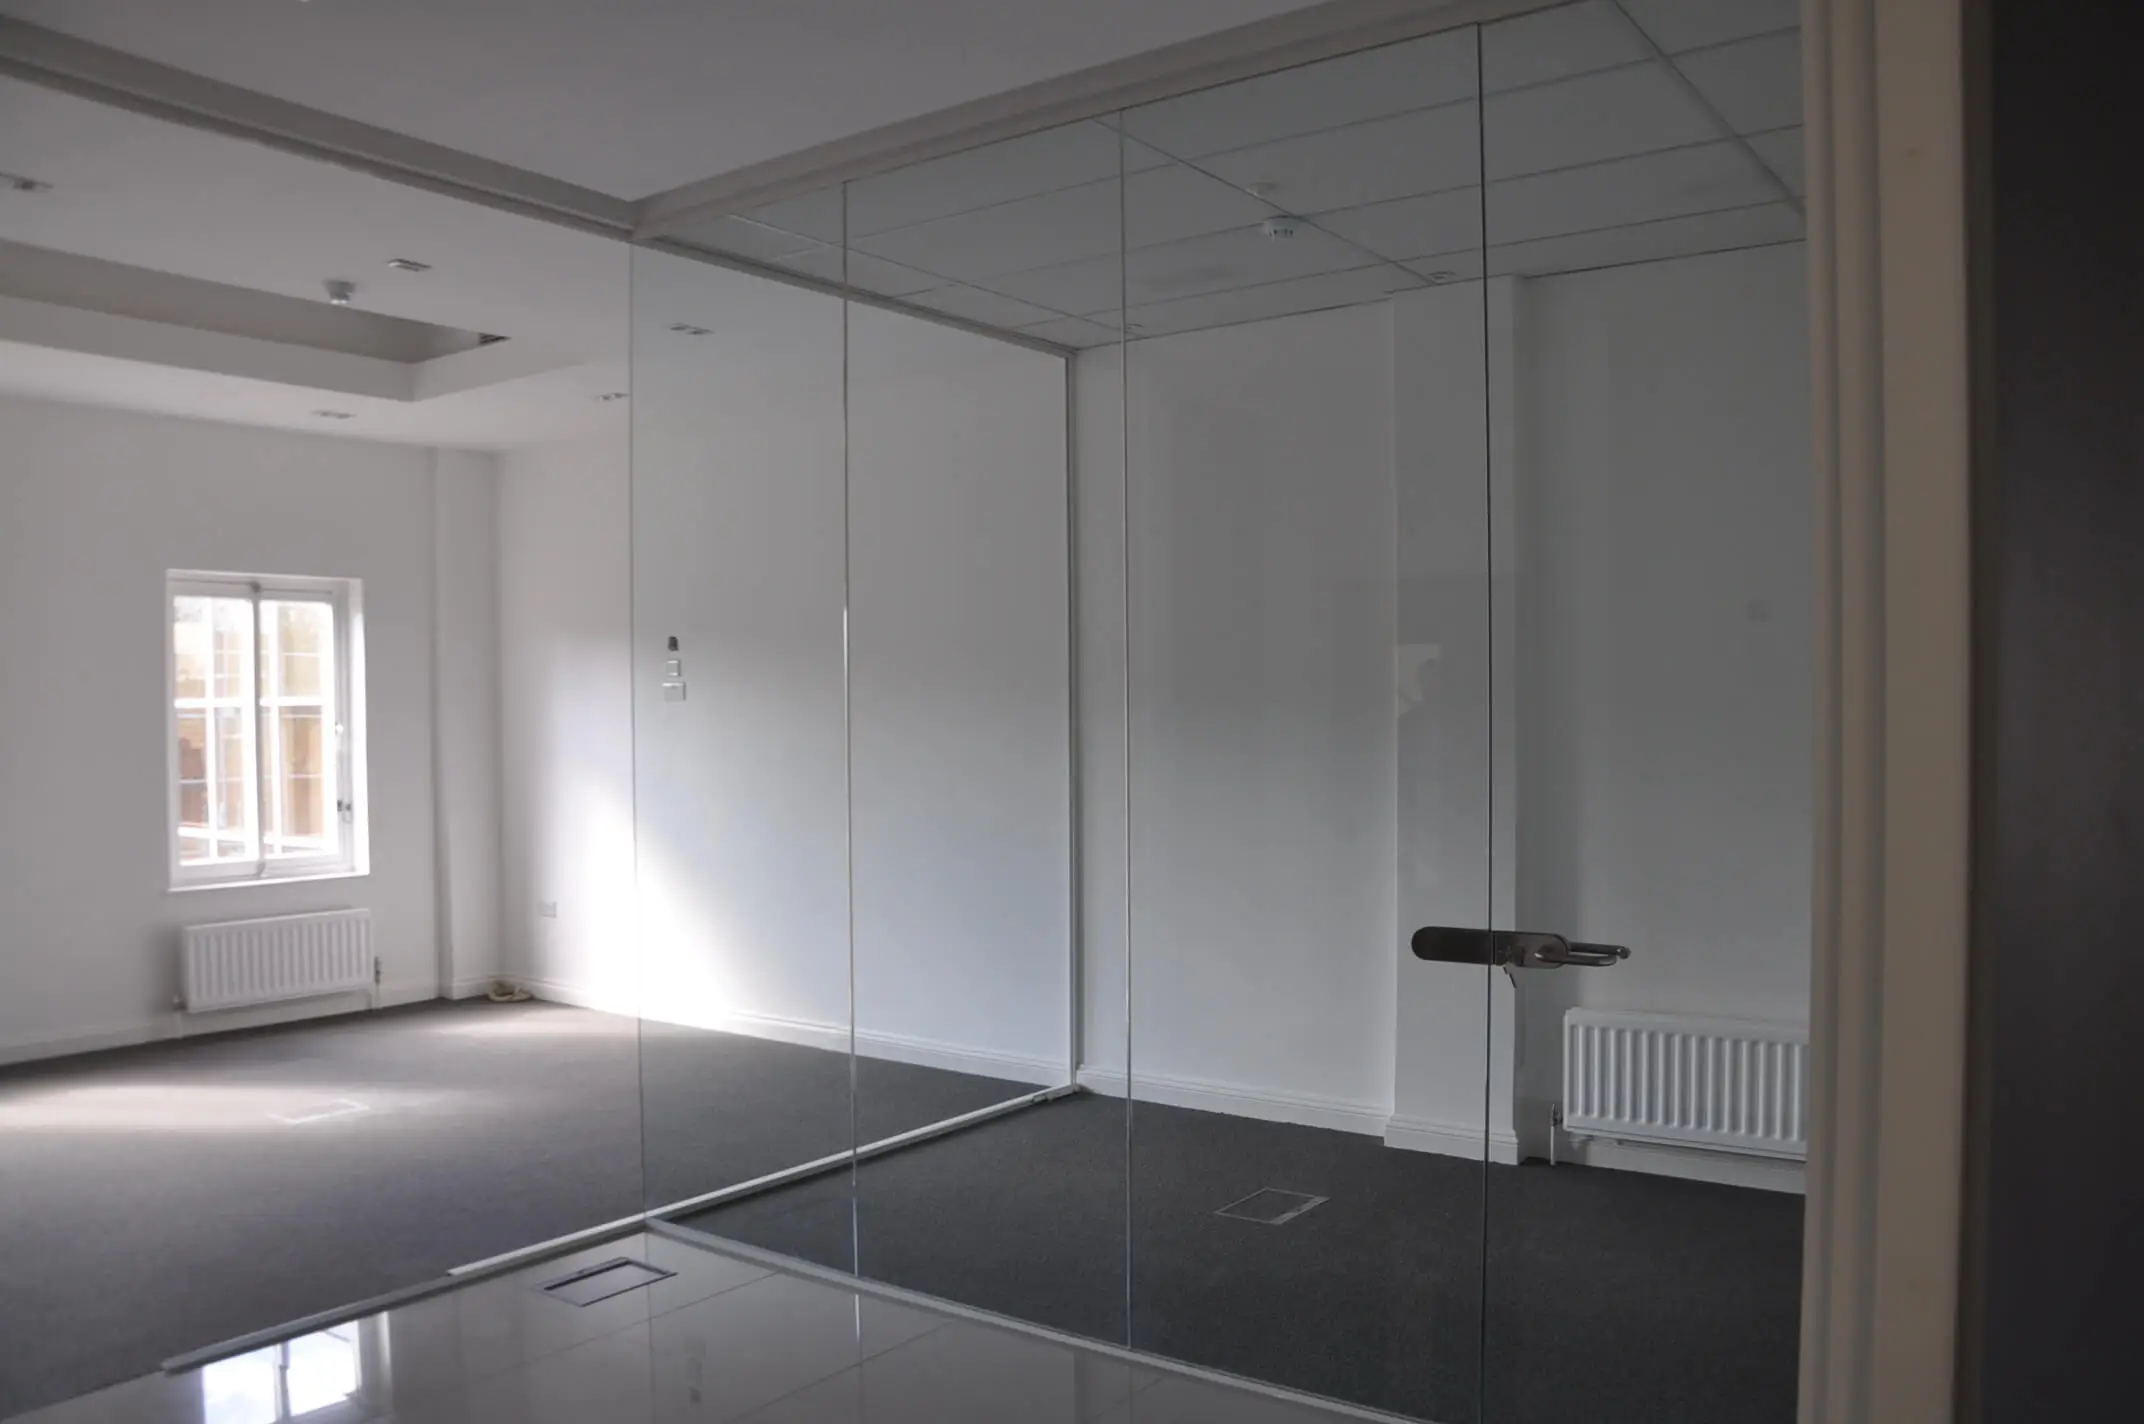 Office space with single glazed glass partitions and doors with lock